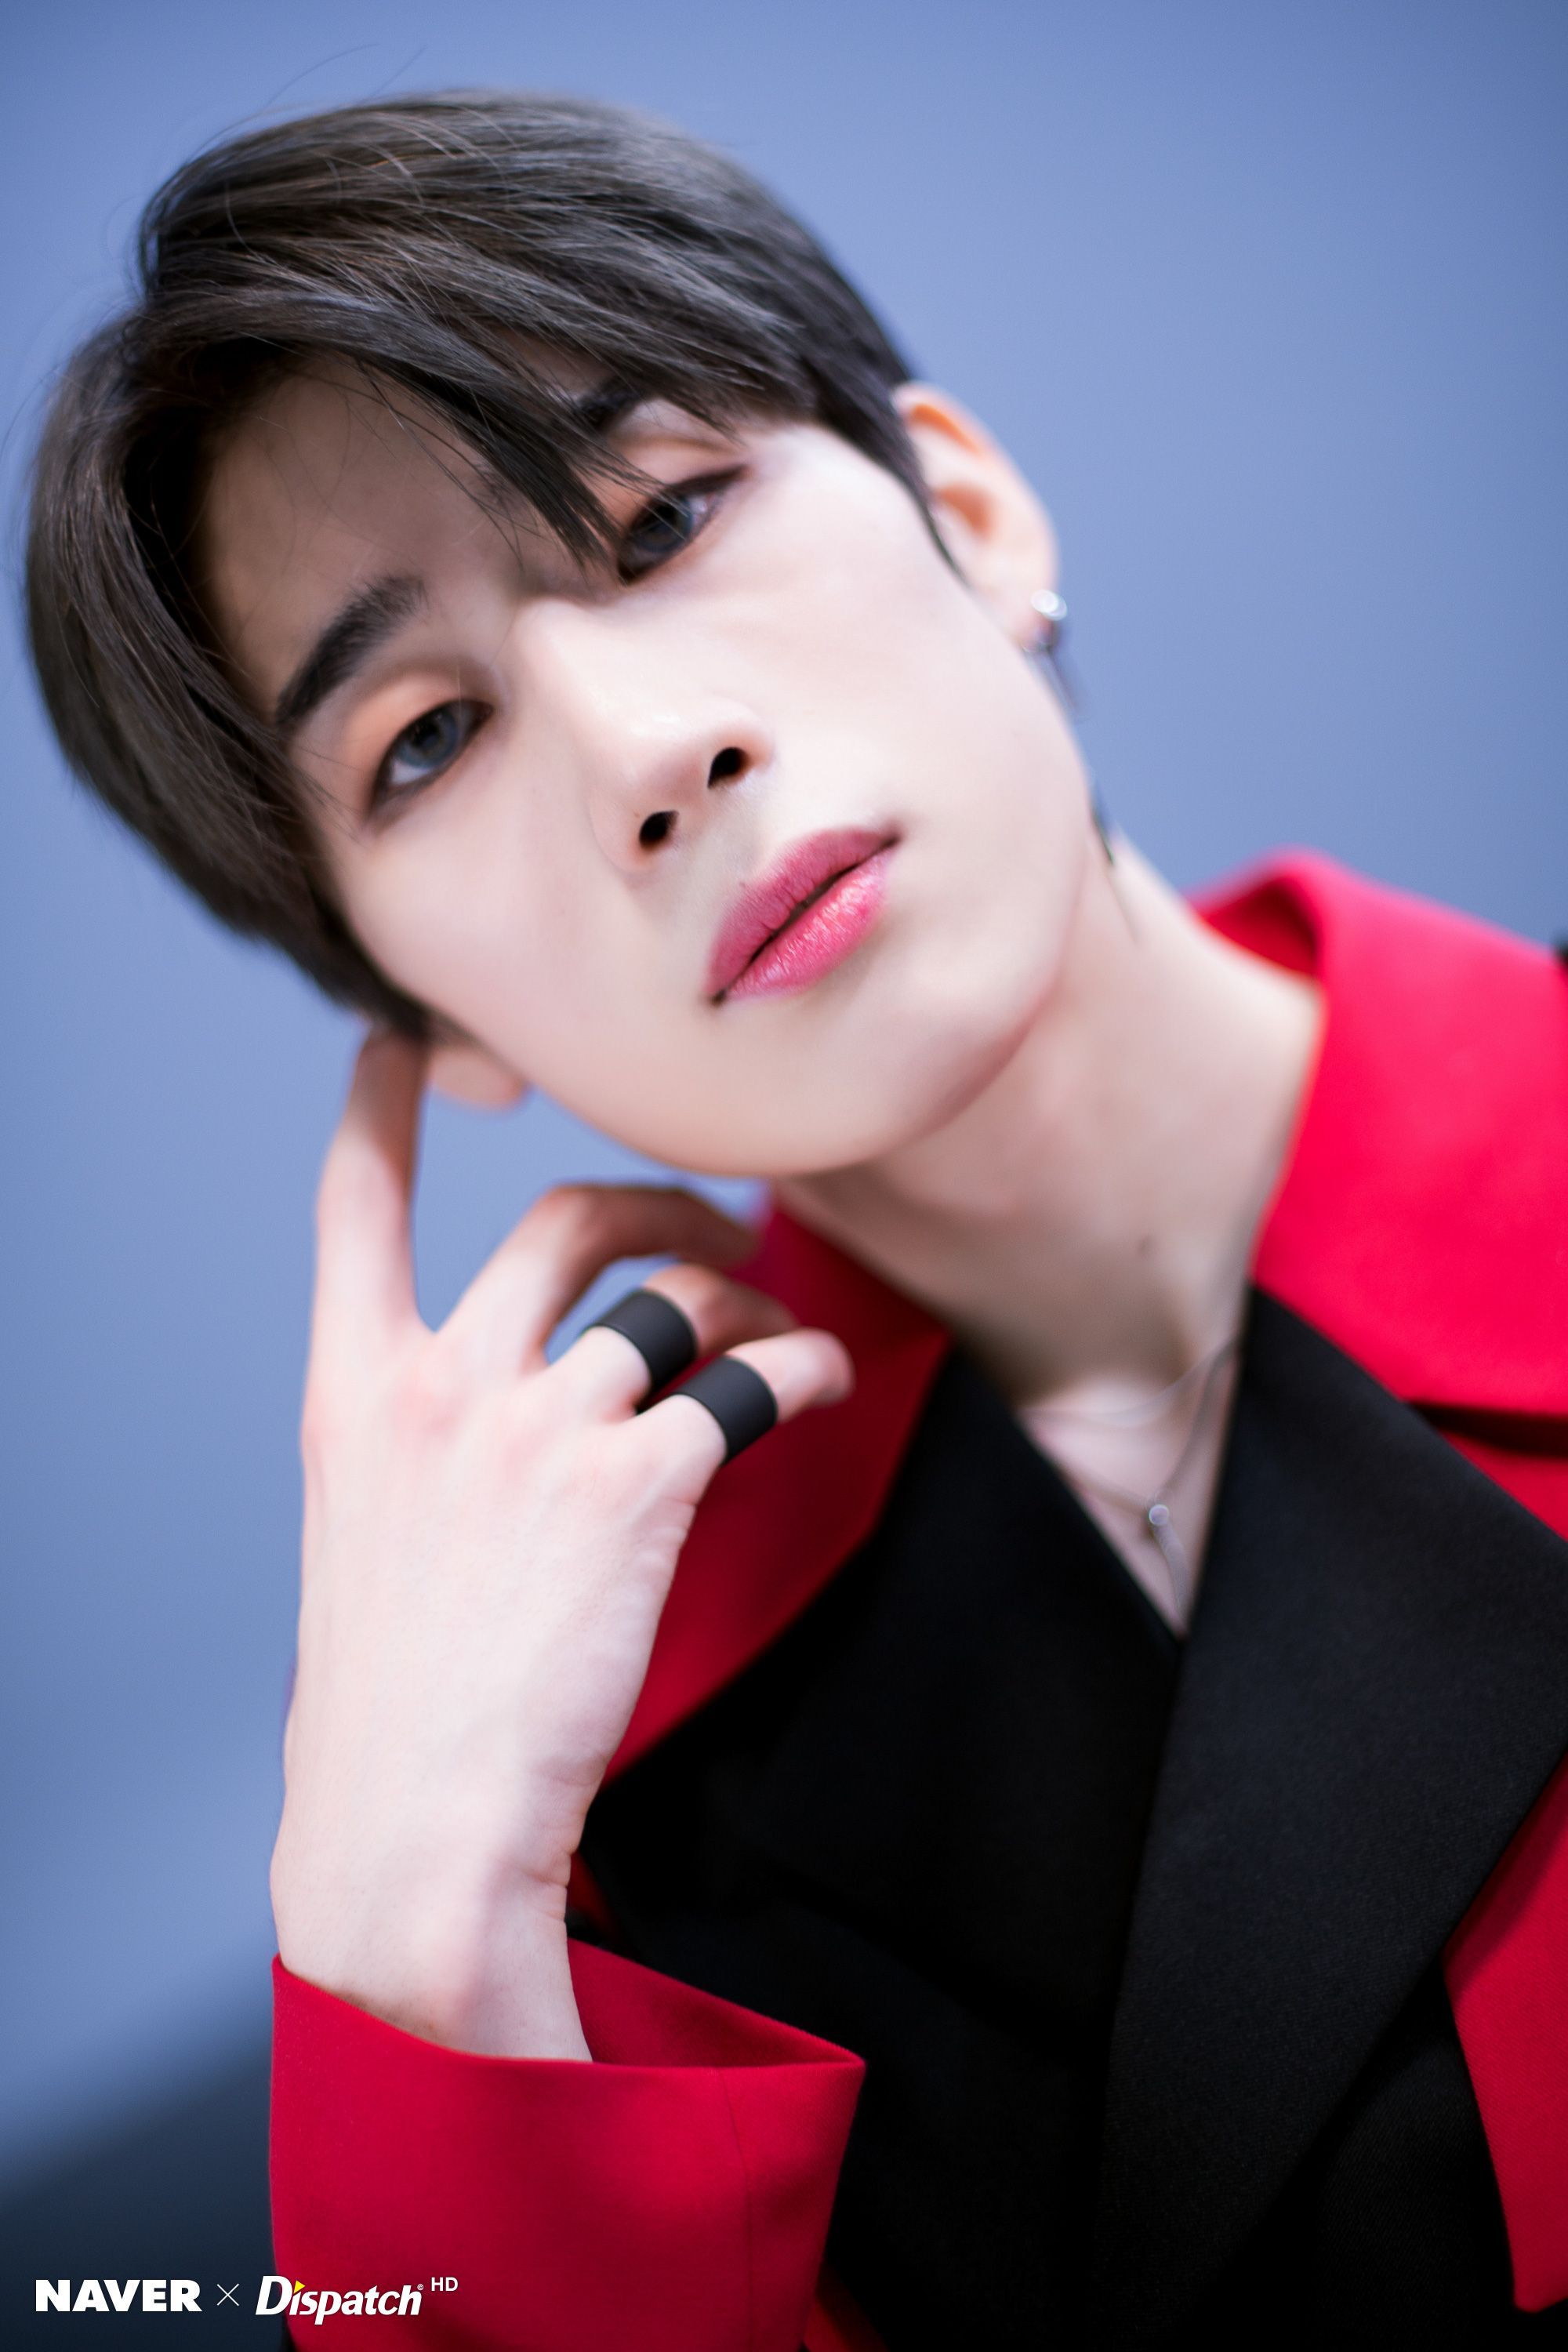 X1's Han Seungwoo 'FLASH' promotion photohoot by Naver x Dispatch